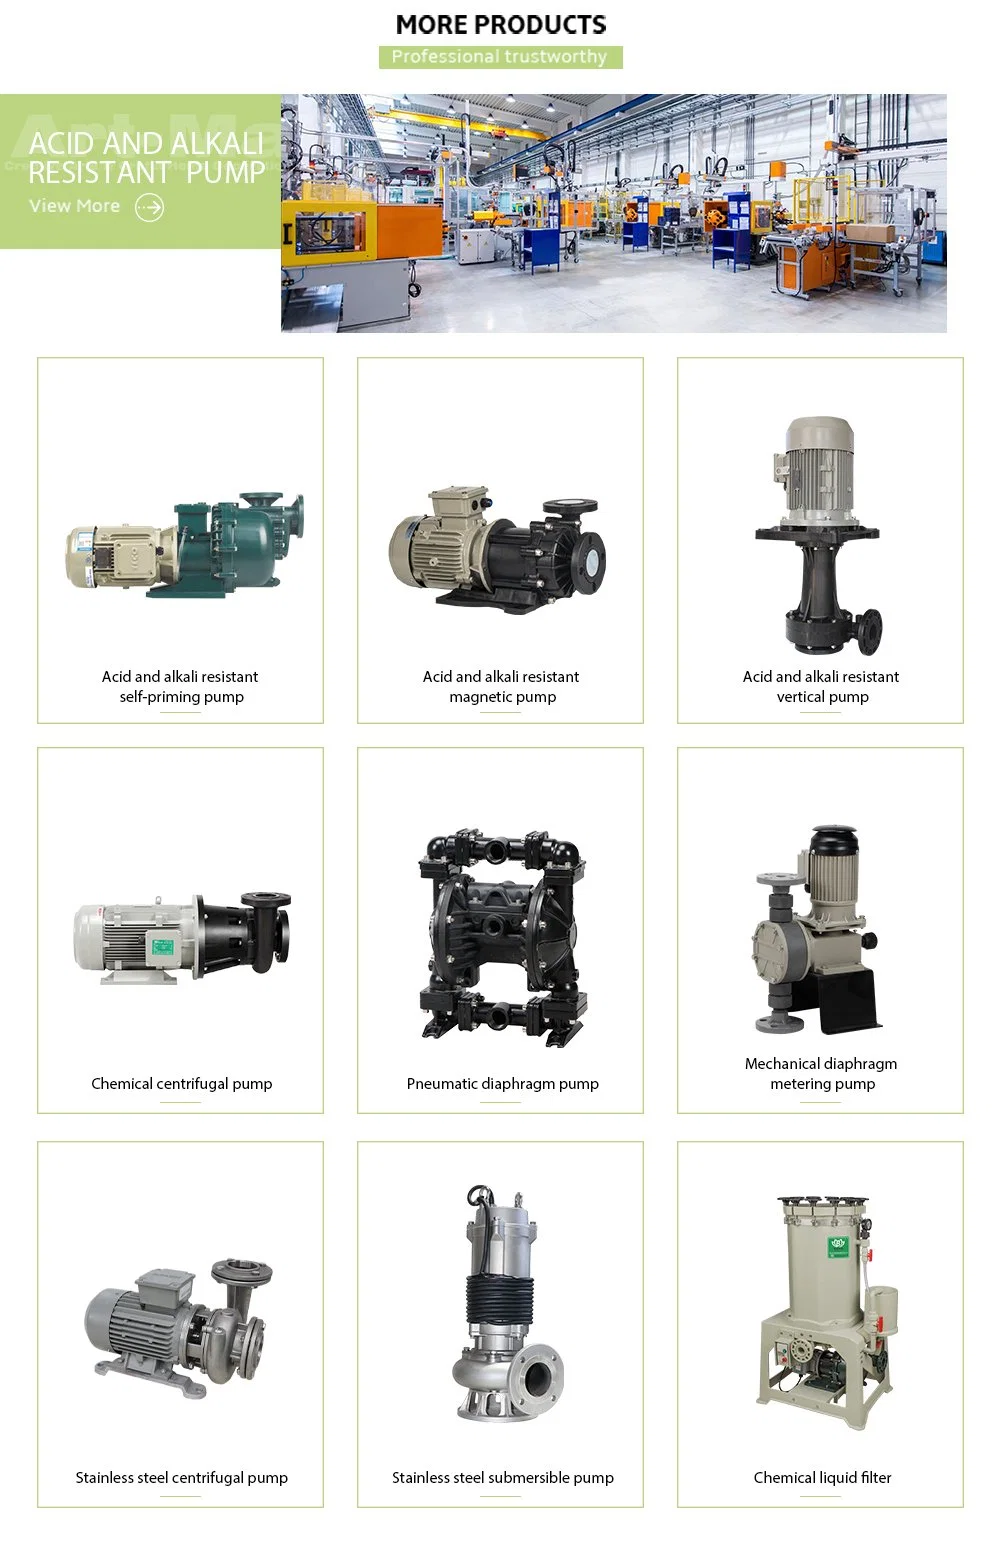 Corrosion Resistant Acid Fluoroplastic Magnetic Pump for Wastewater or Sewage Treatment